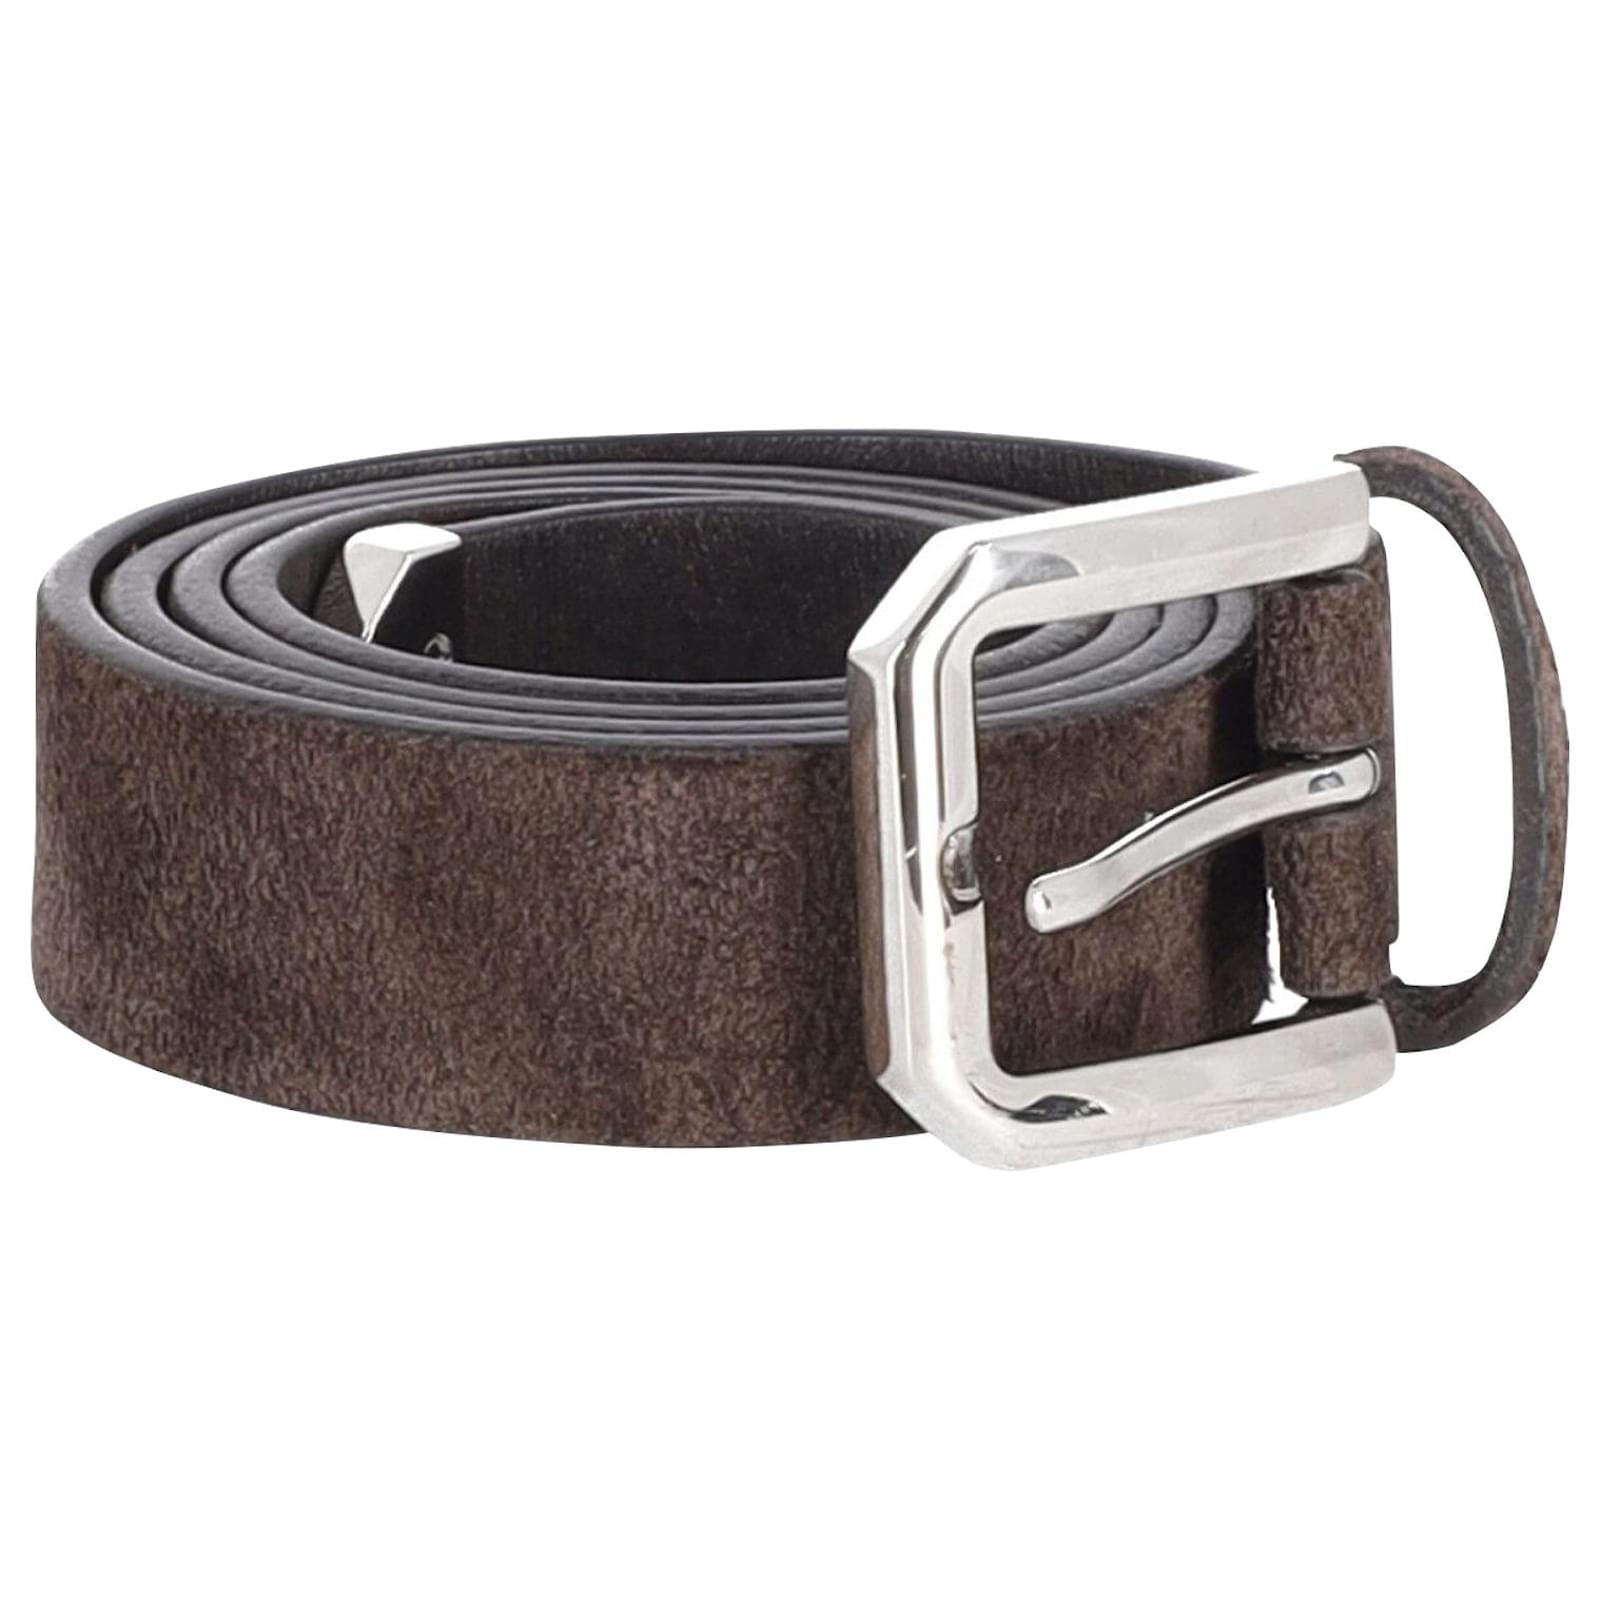 Brown Suede Leather Belt With Silver Metal Buckle for Men By Brune & B